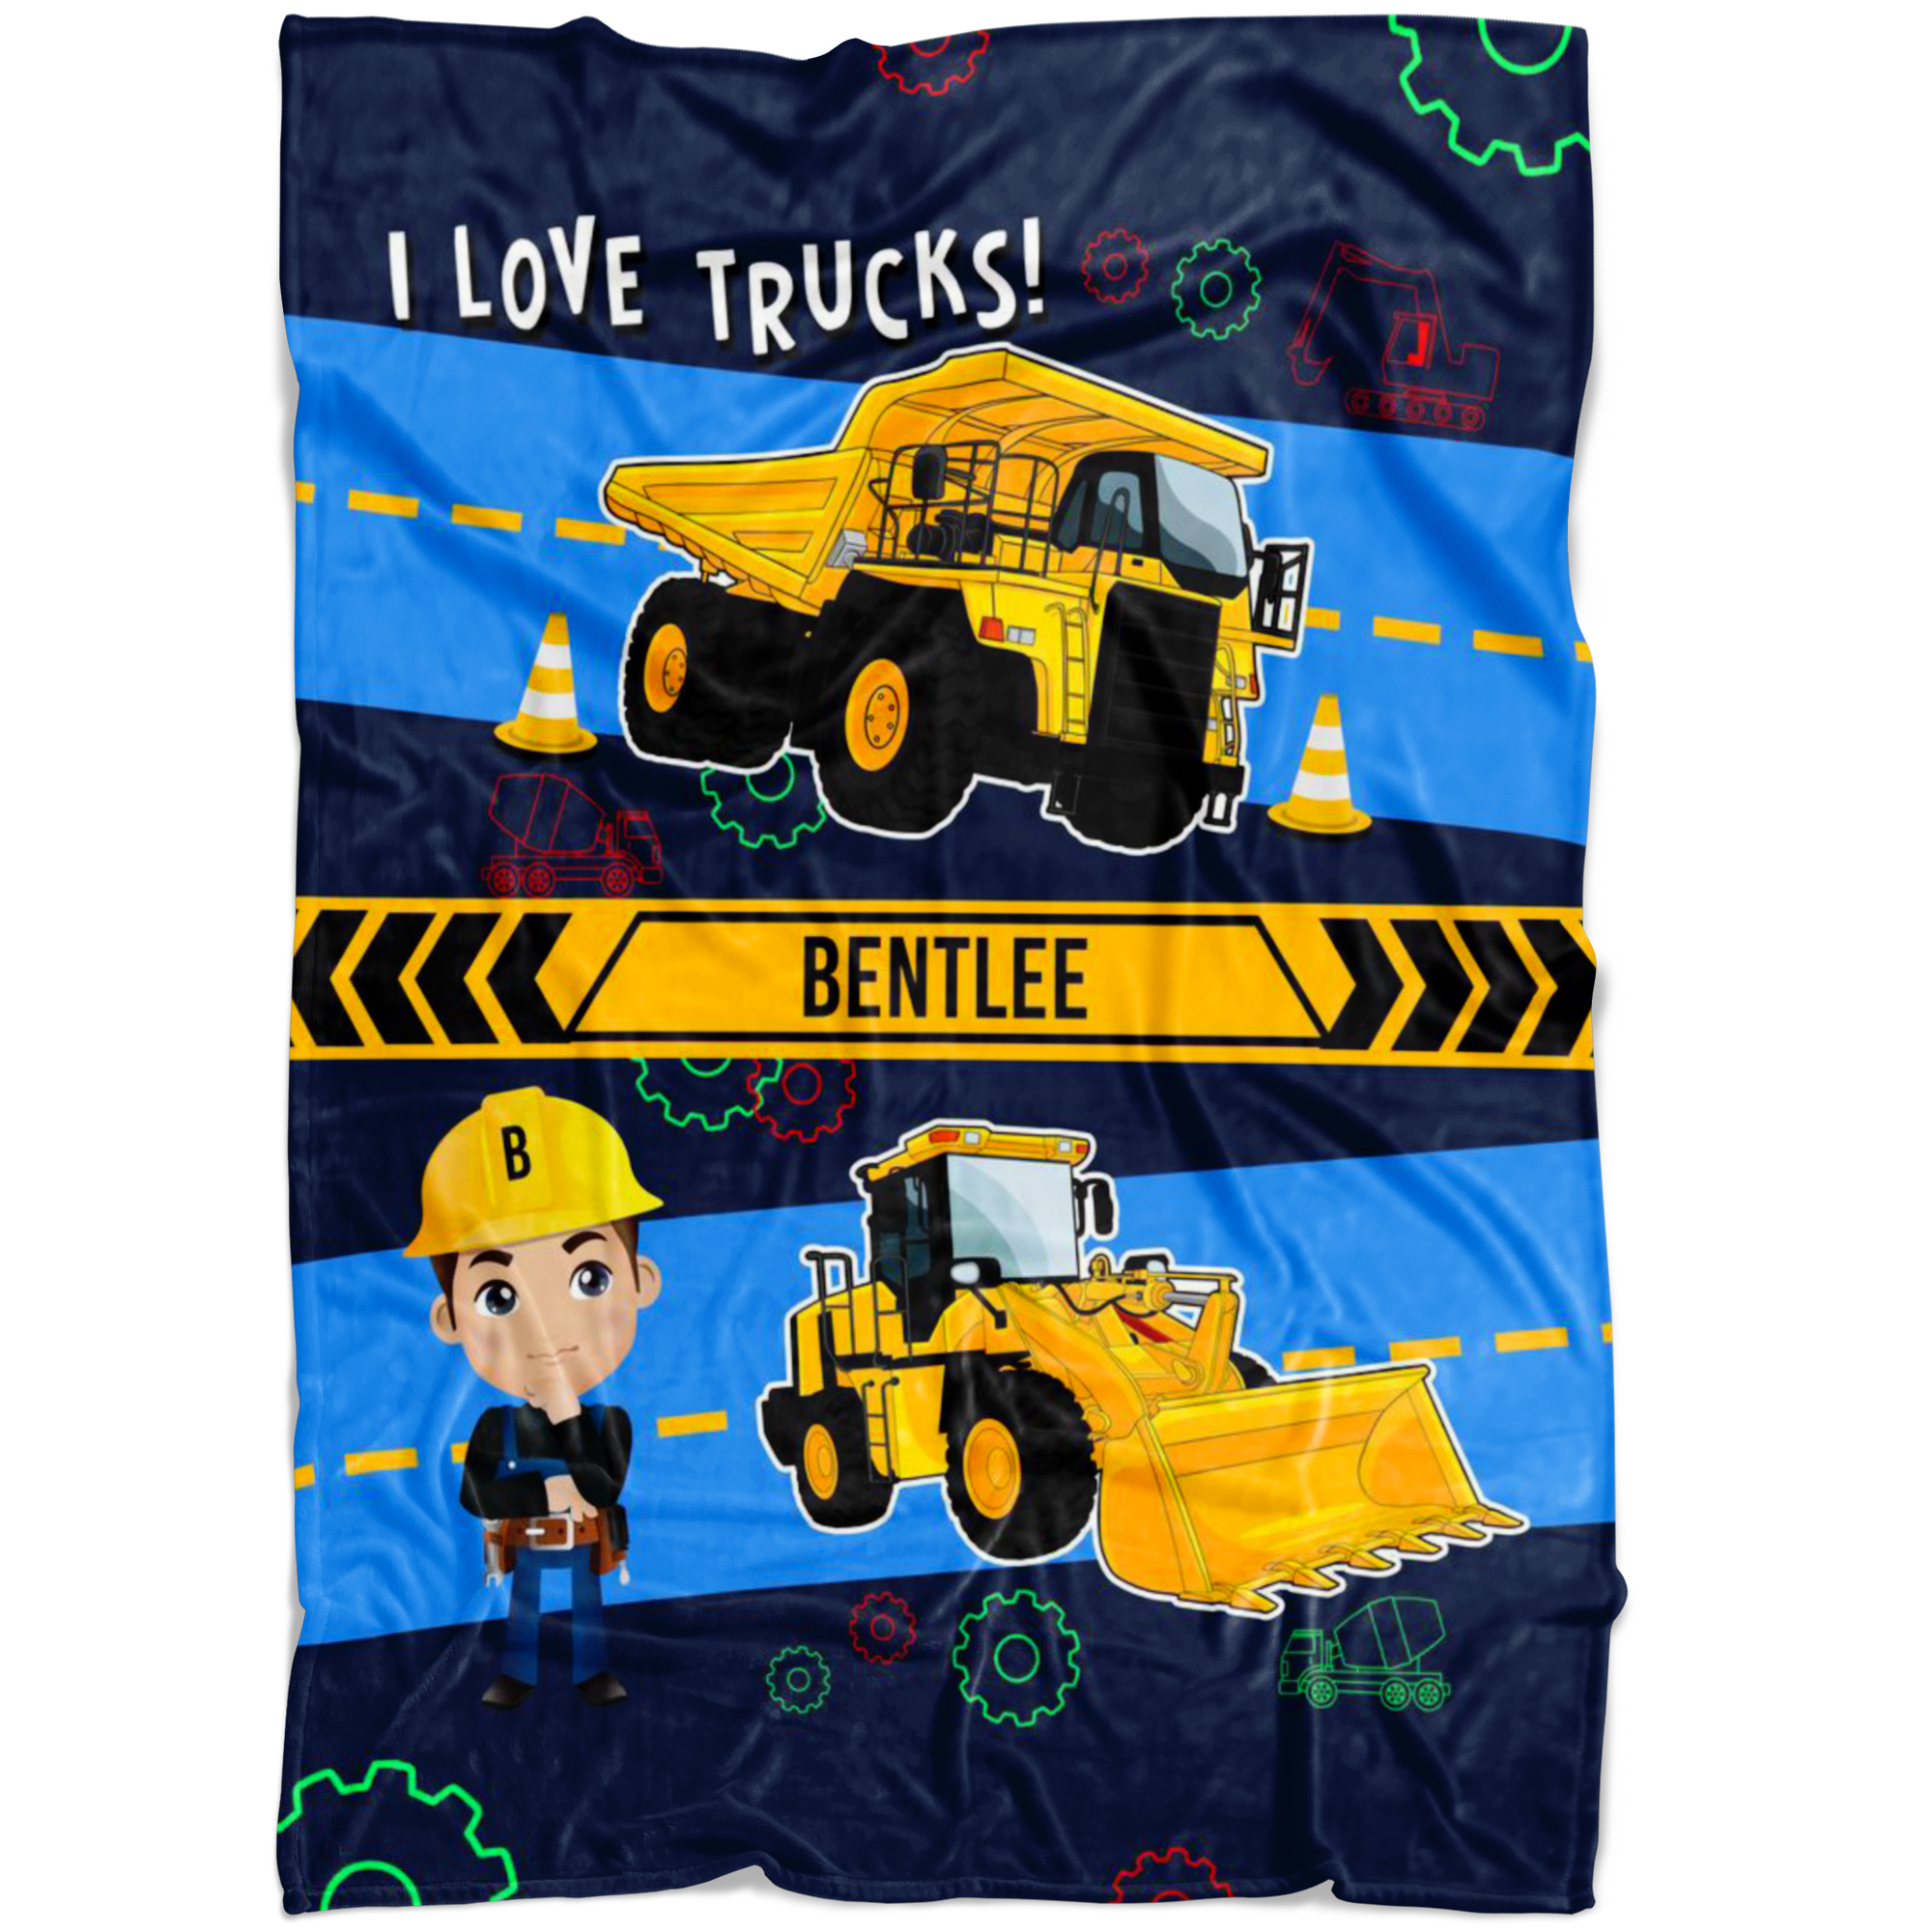 Personalized Name I Love Trucks Blanket for Boys & Girls with Character Personalization - Bentlee